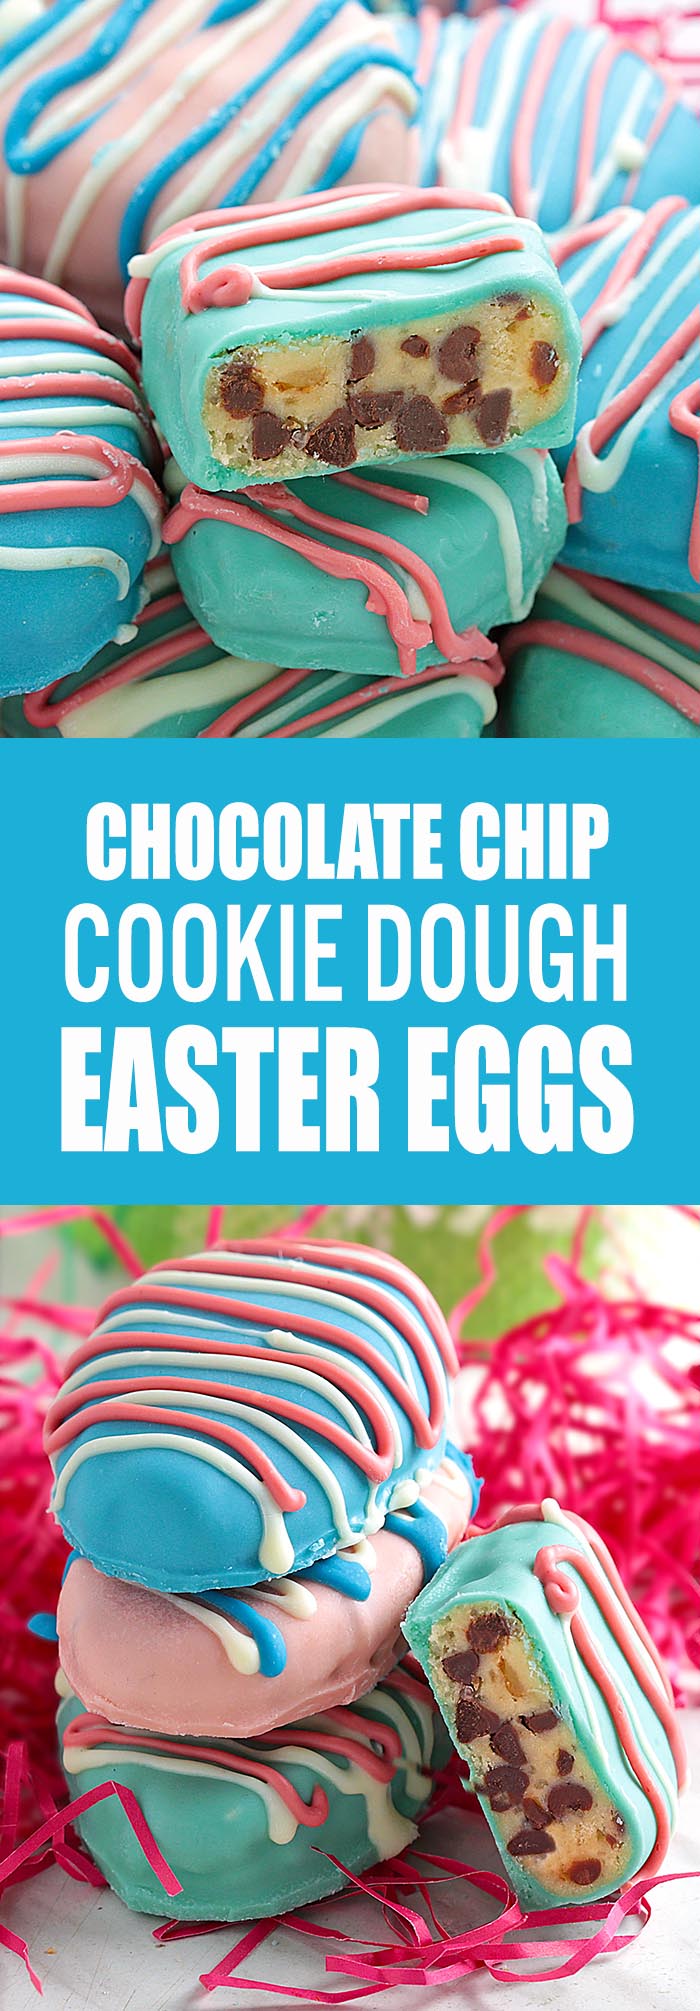 Easter Egg Cookie Dough Truffles - Cakescottage